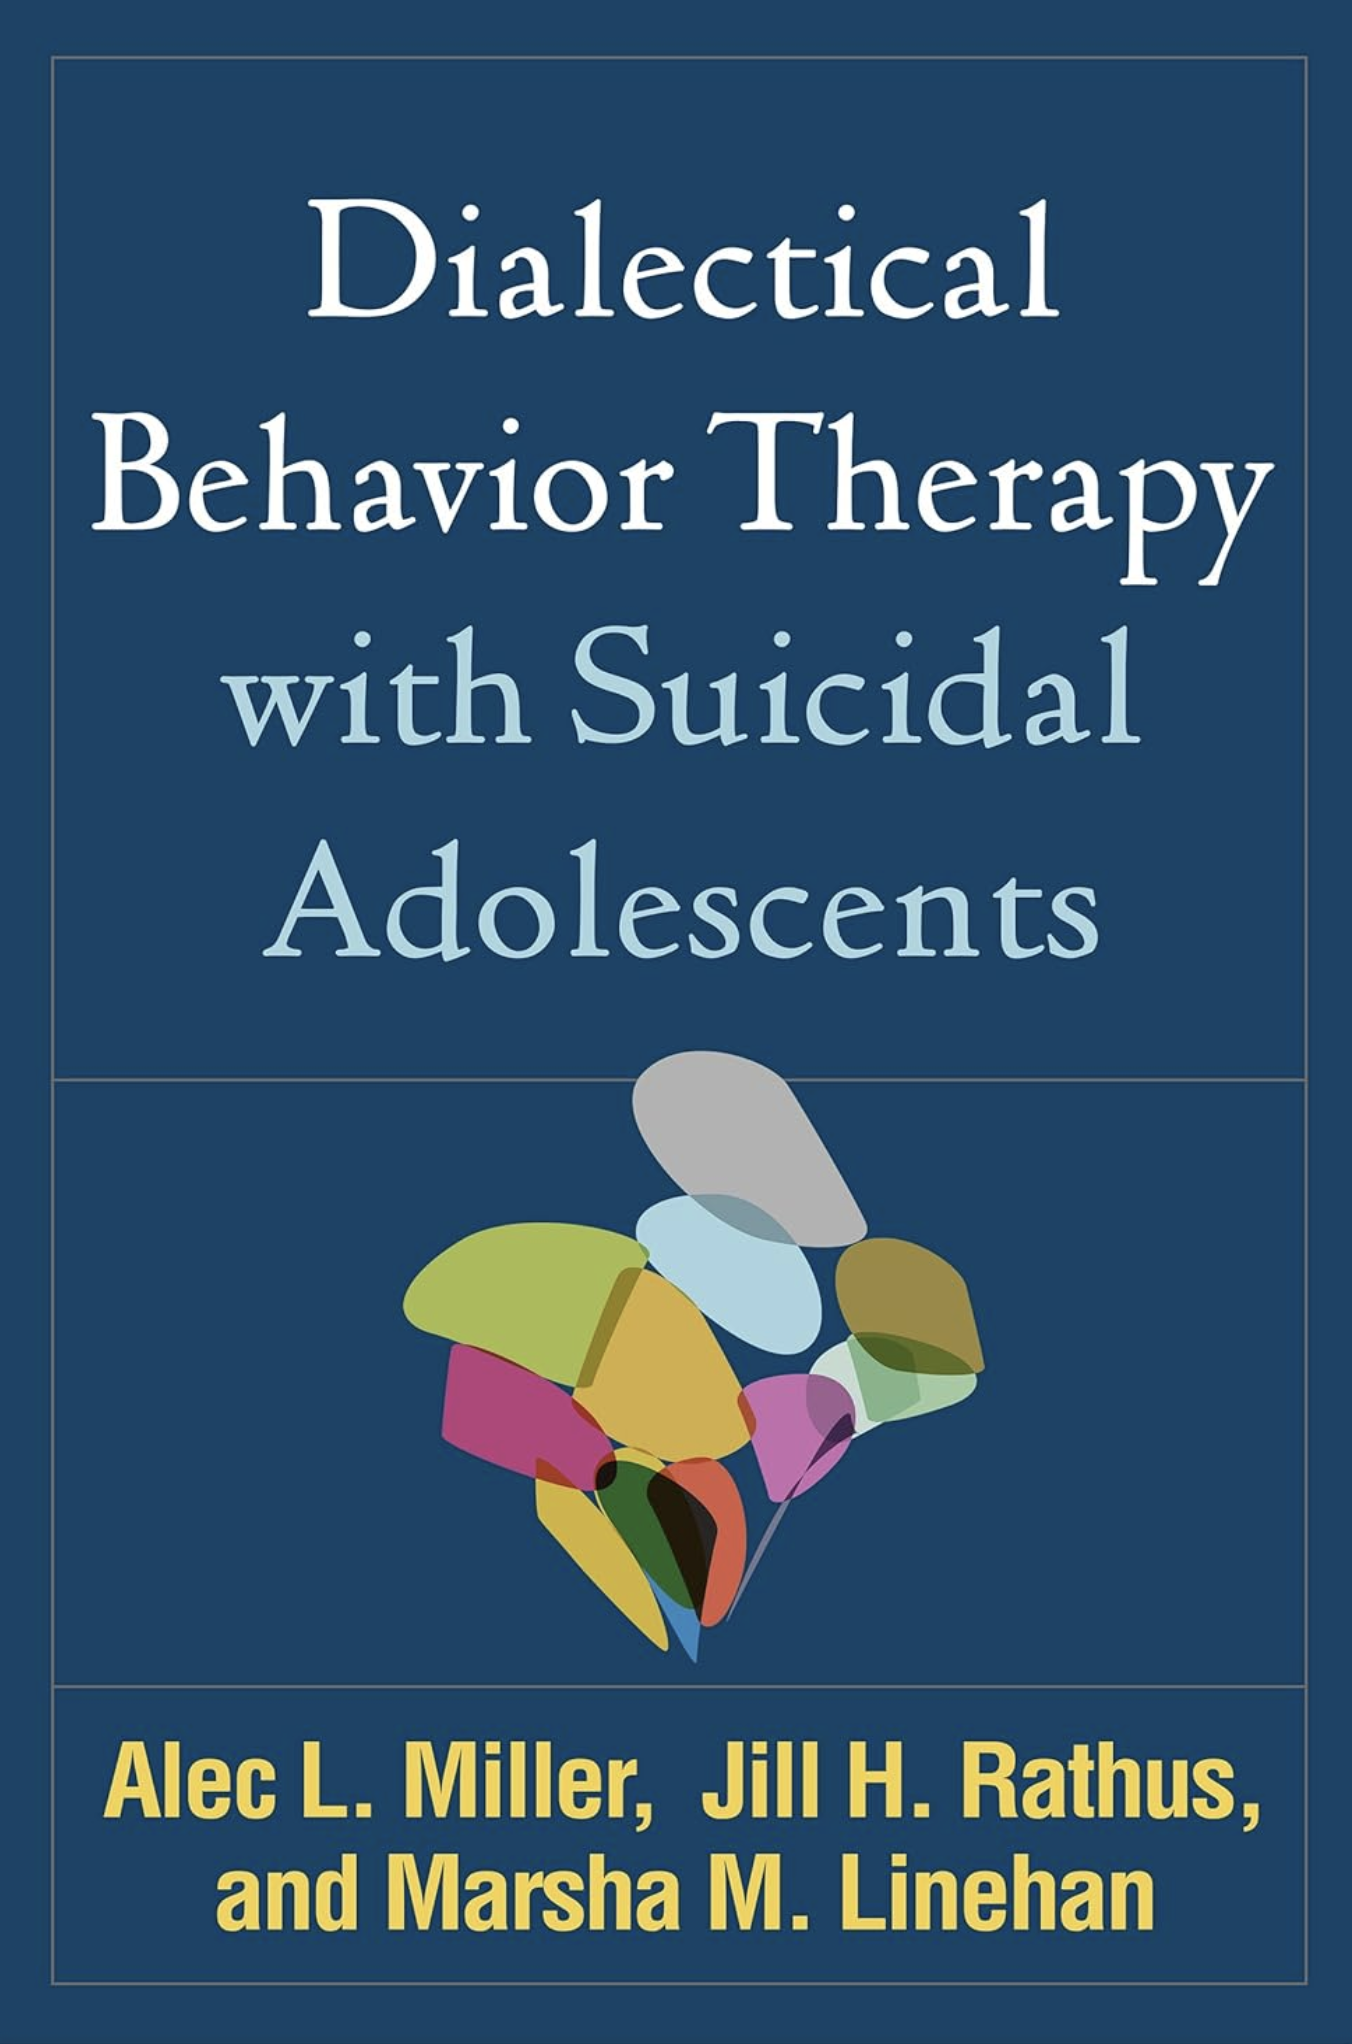 Book cover of "Dialectical Behavior Therapy with Suicidal Adolescents"